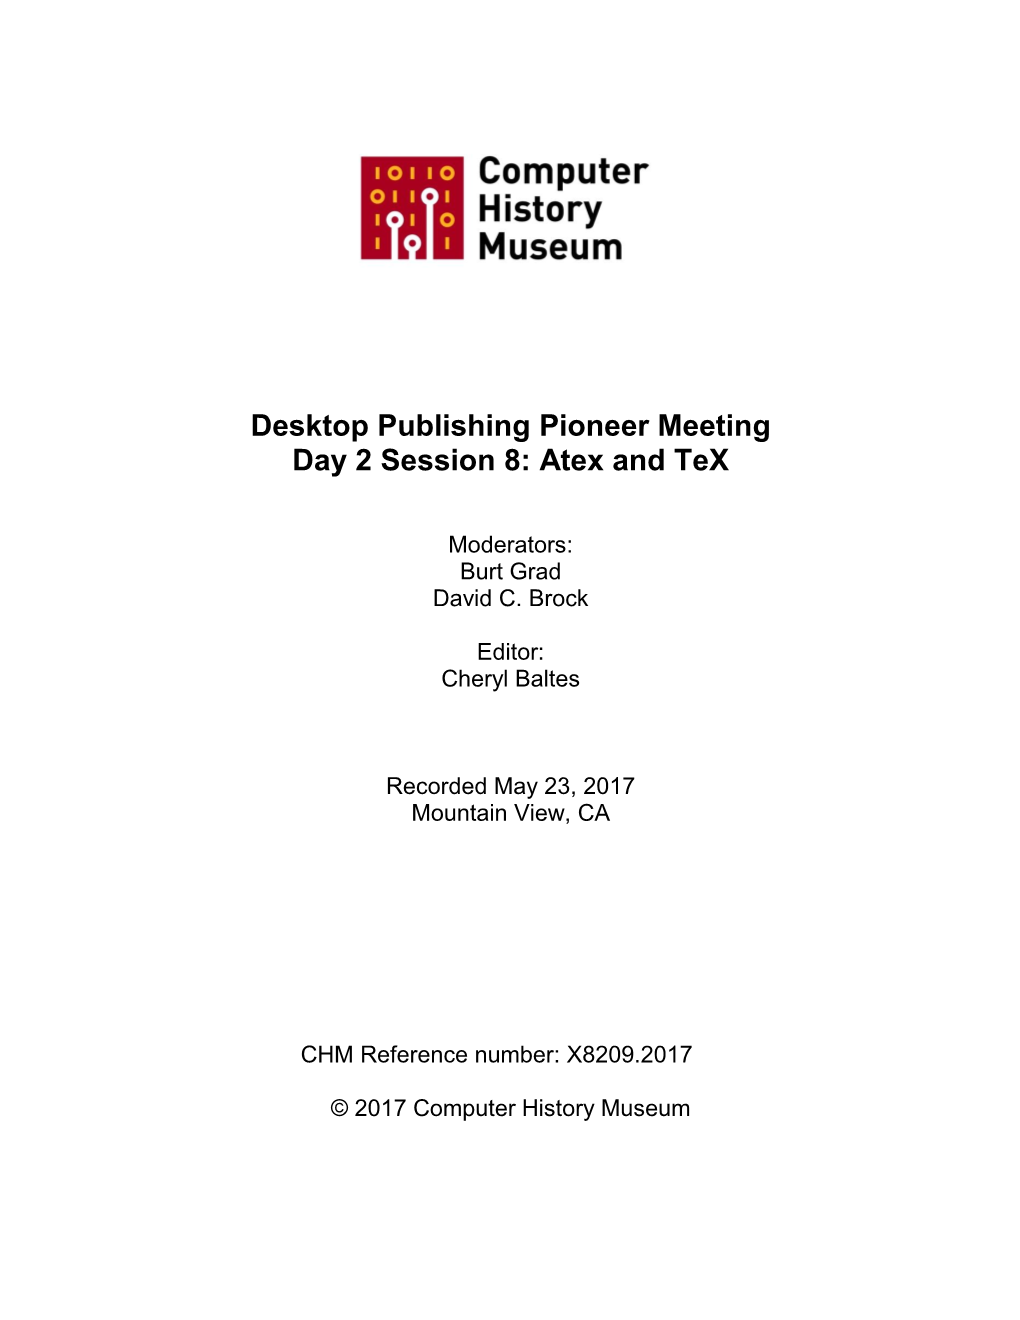 Desktop Publishing Pioneer Meeting Day 2 Session 8: Atex and Tex